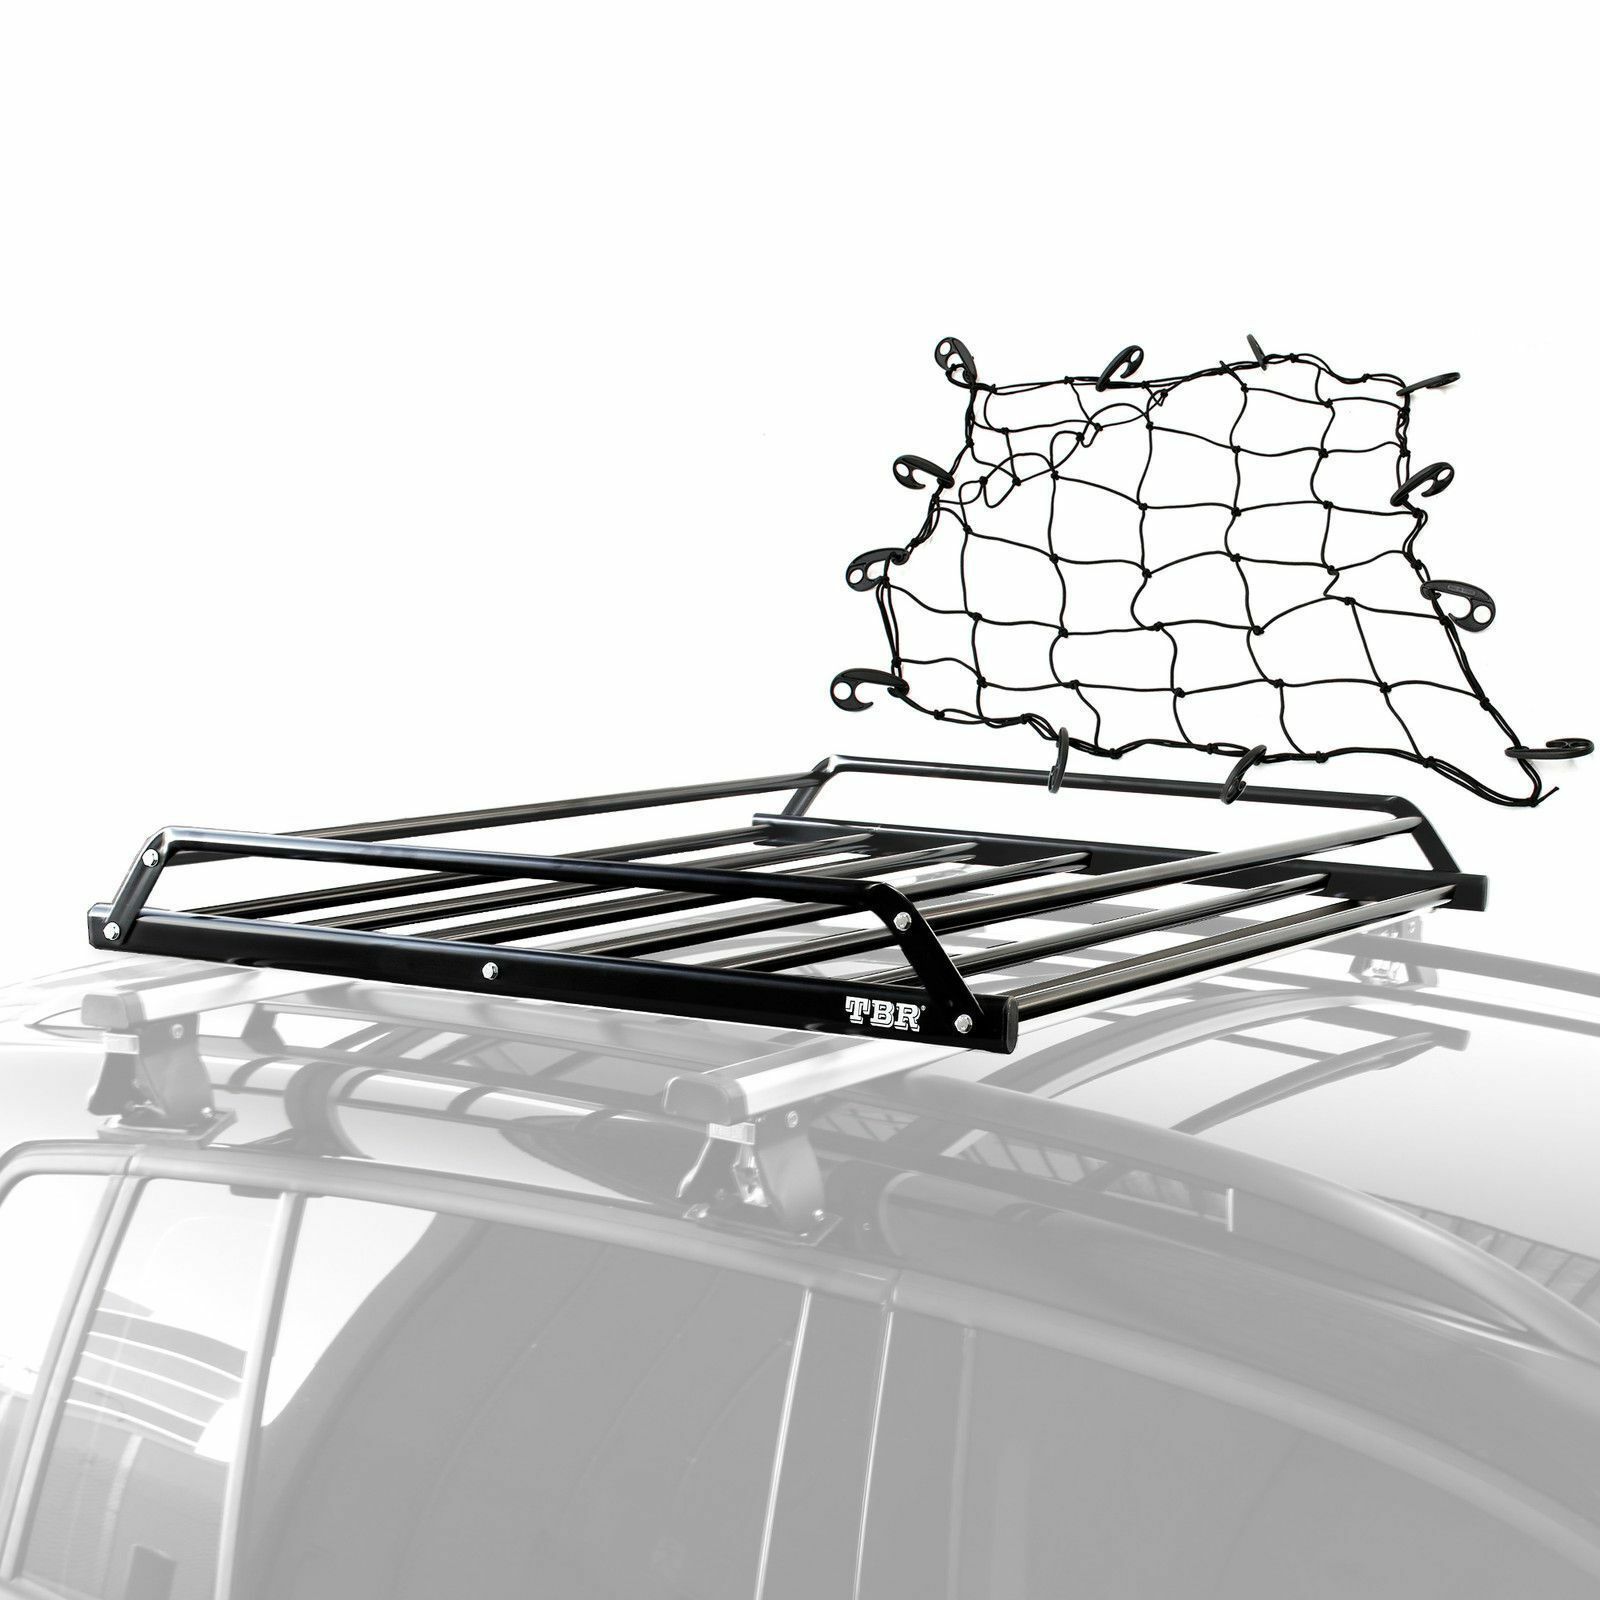 Buy Car Roof Tray Platform Carry Basket With Net 1110x970mm Cd